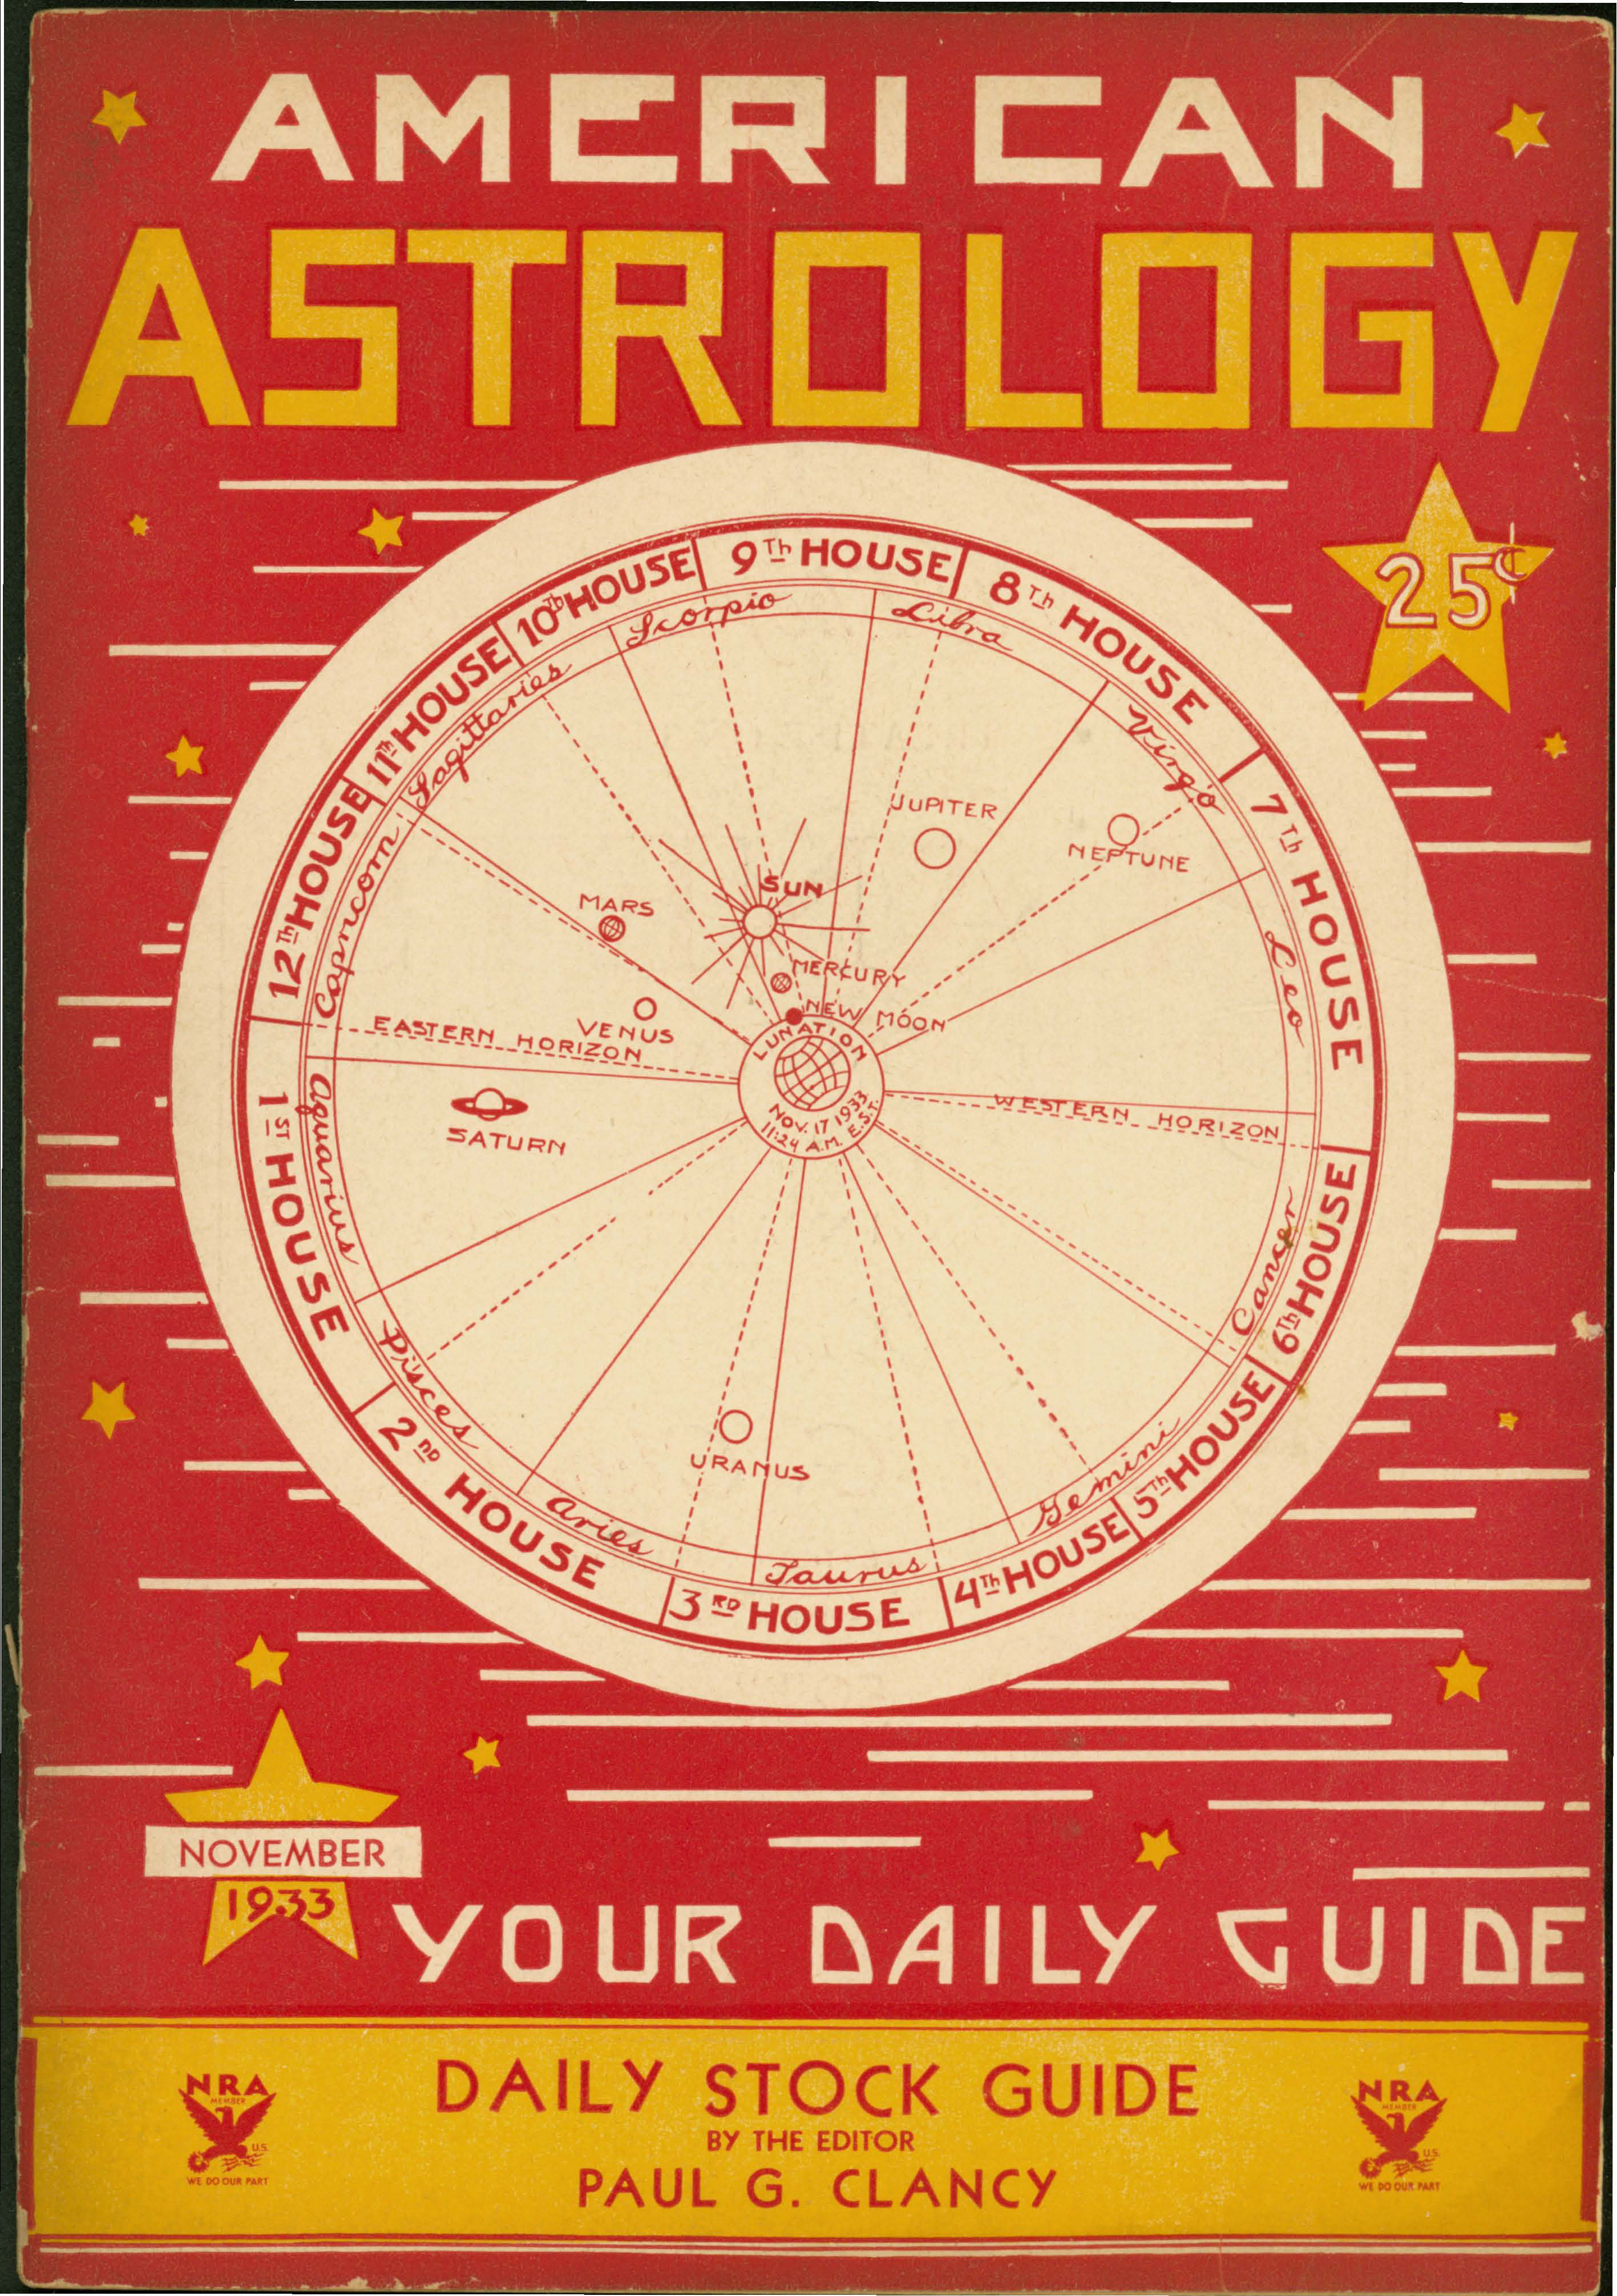 American Astrology 1933 covers_Page_7